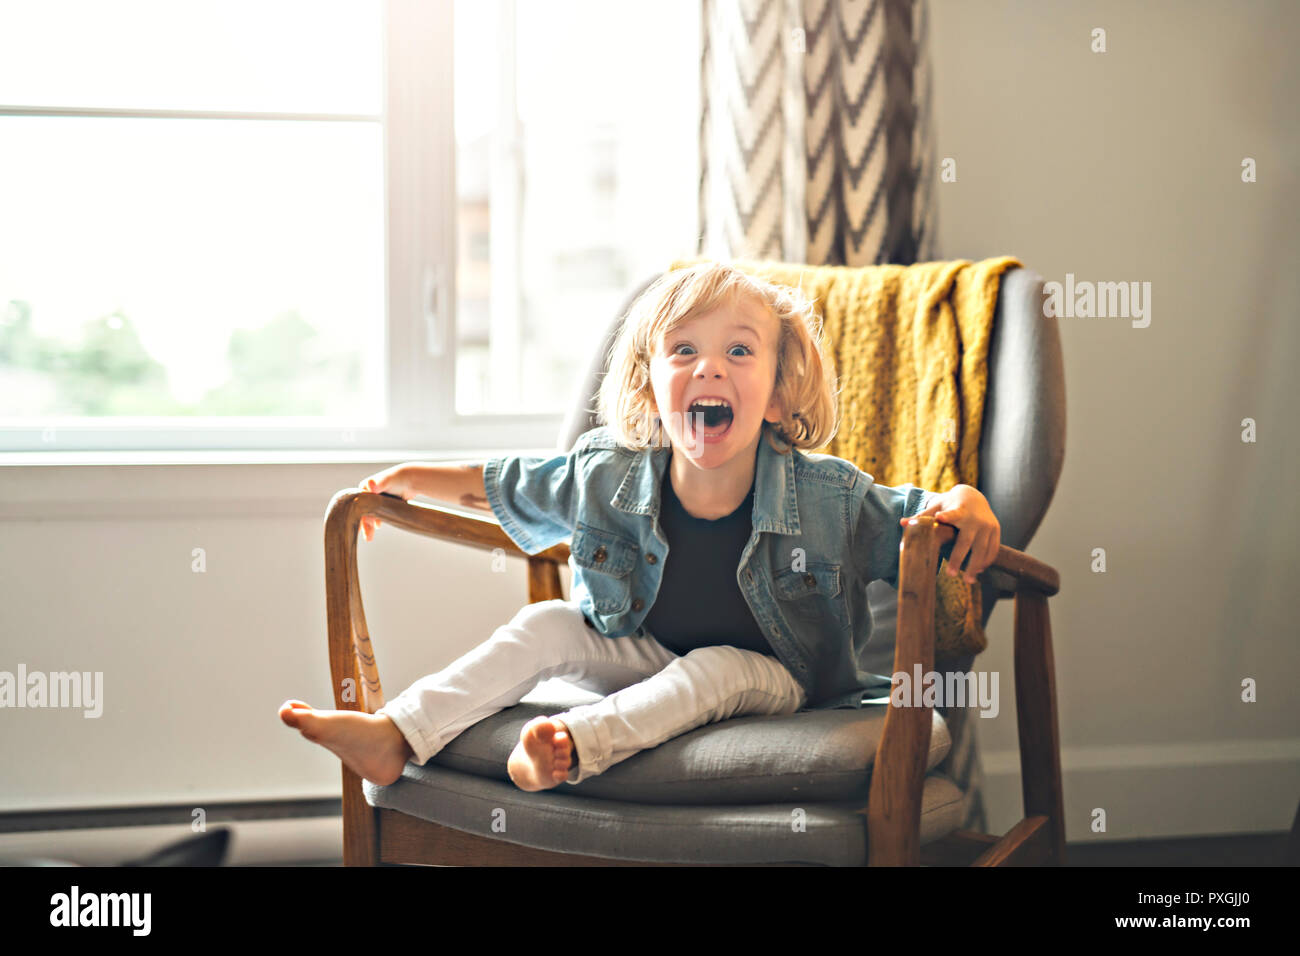 A Cute two years old child sit on chair Stock Photo